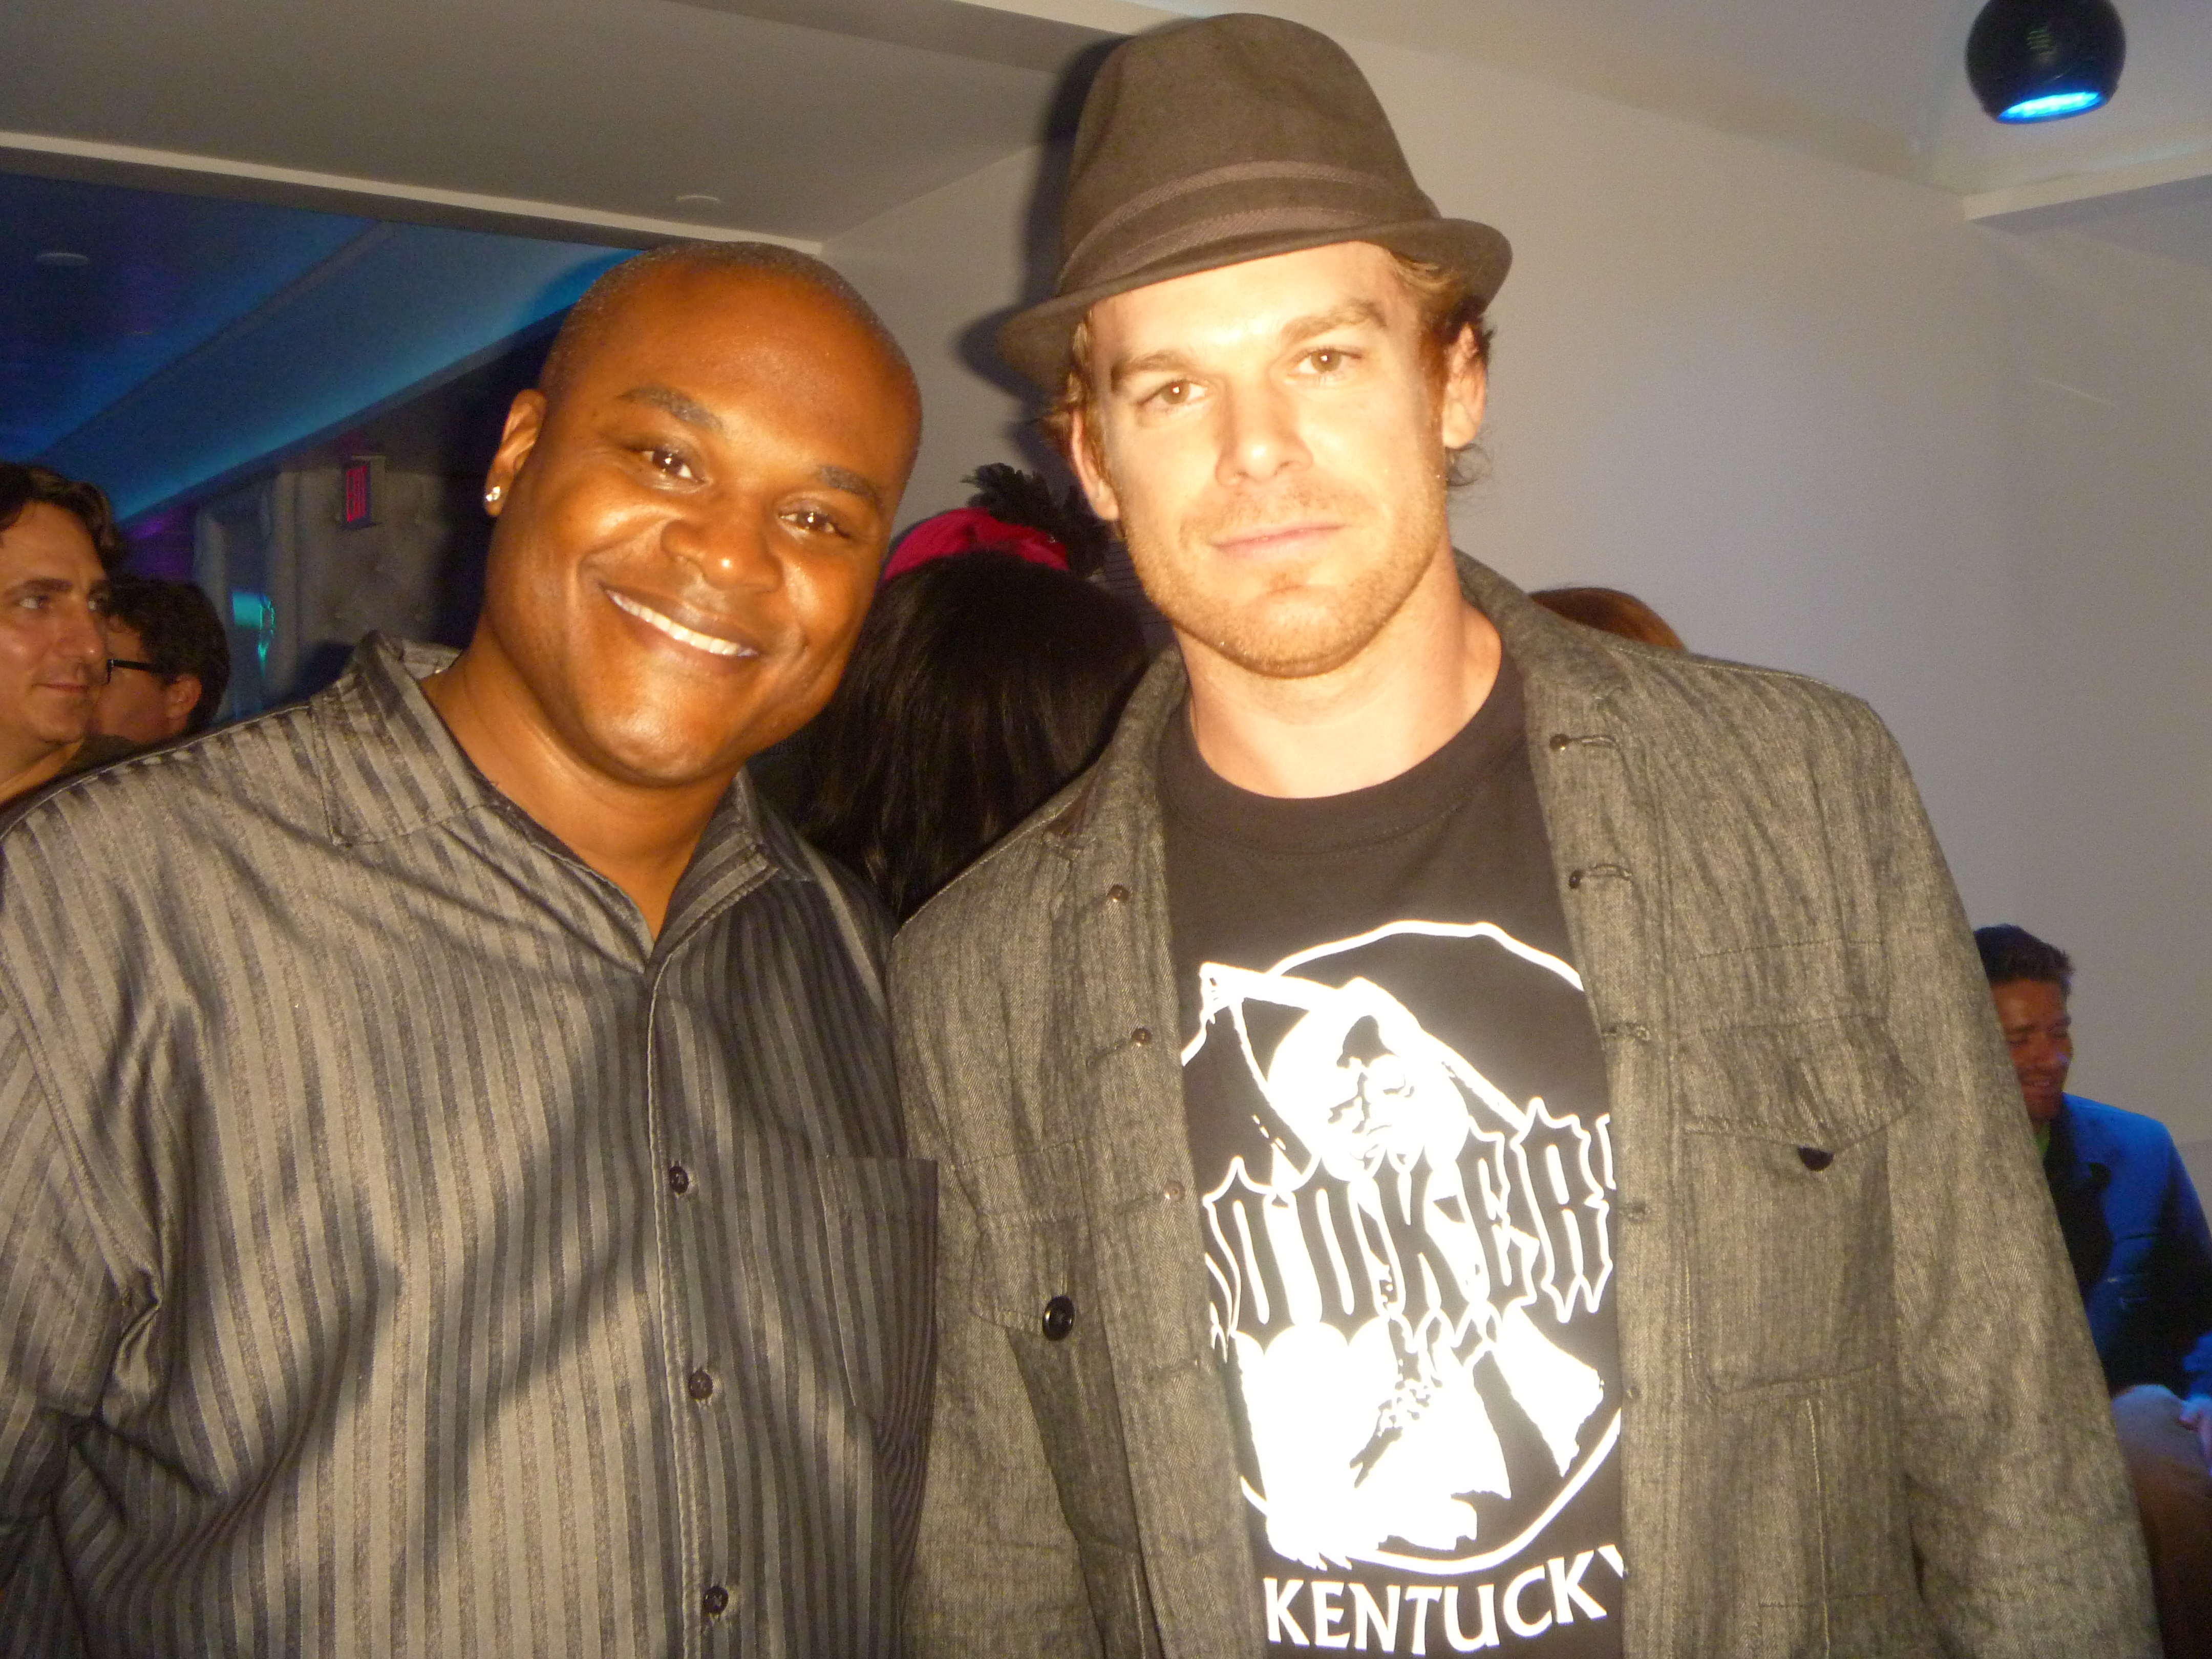 Kevin Linell and Michael C. Hall at Dexter Season 7 Wrap Party.